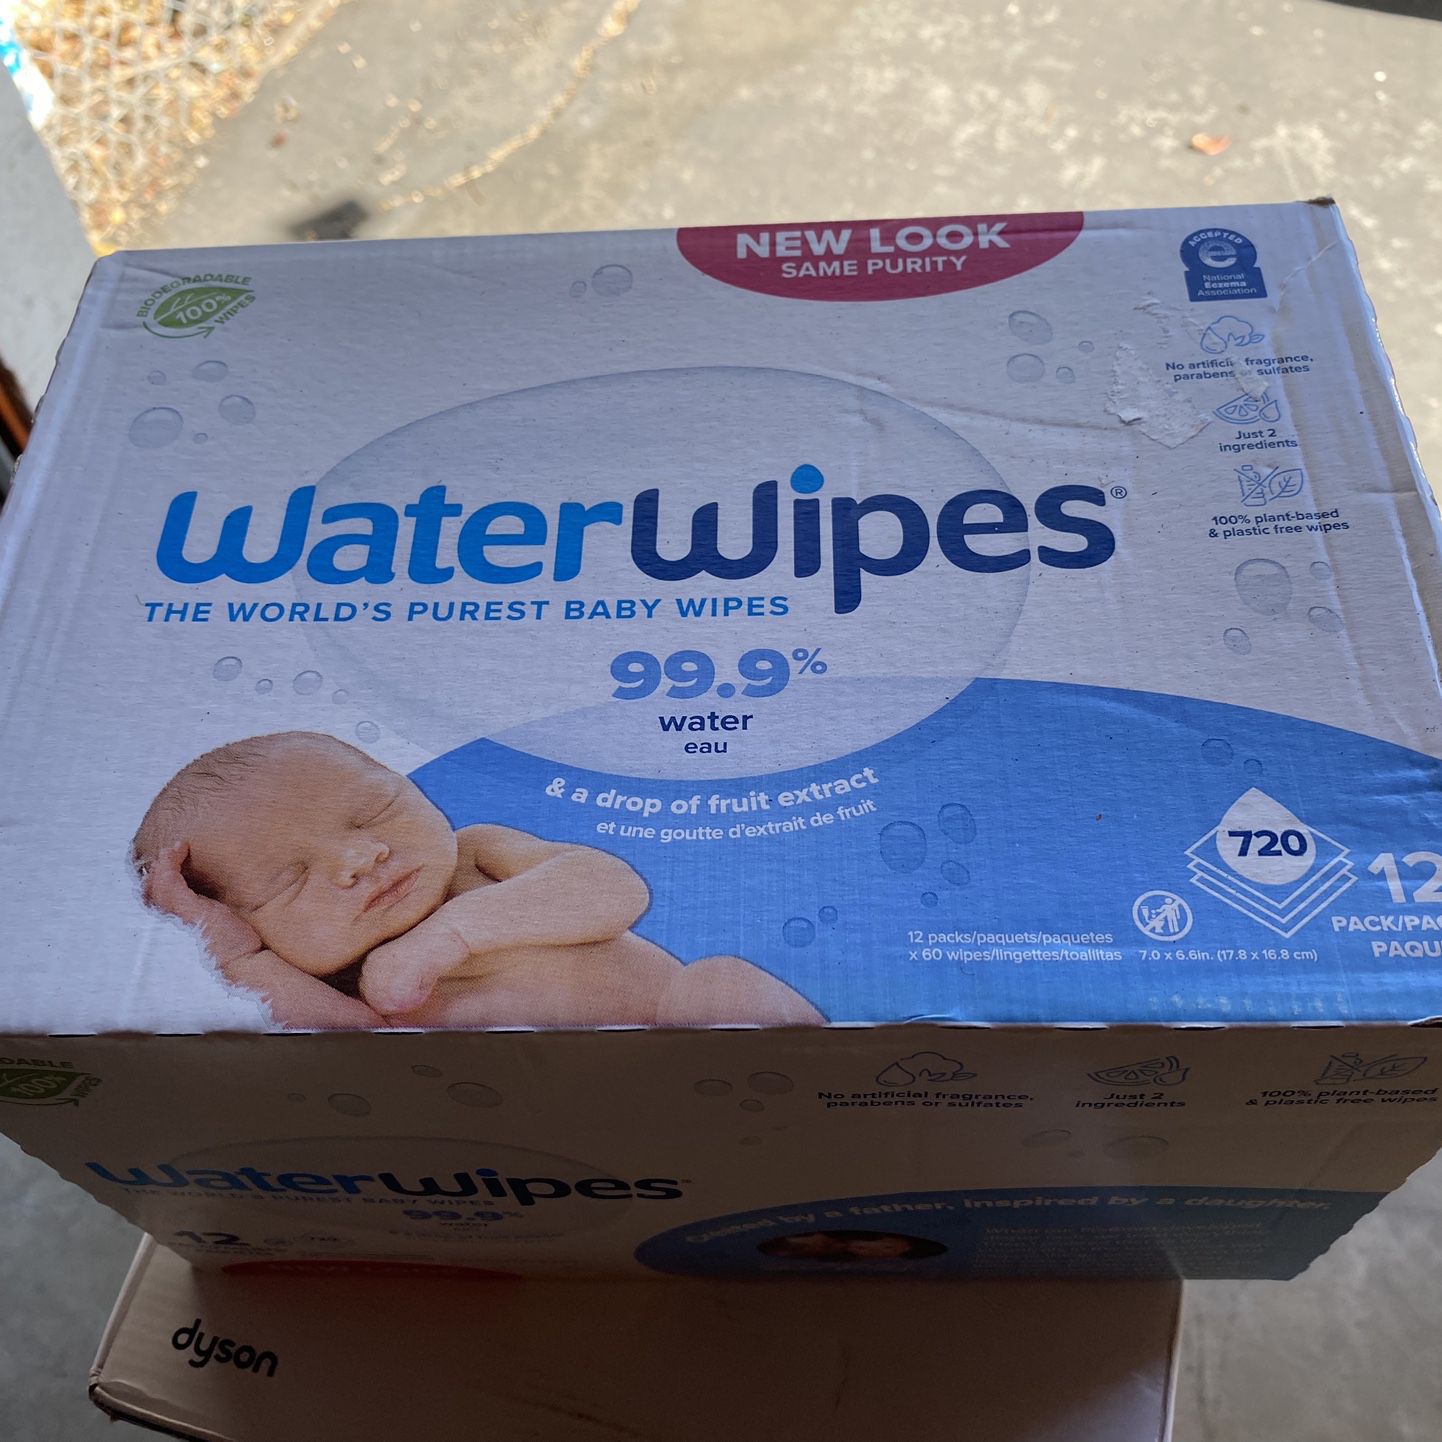 WaterWipes Plastic-Free Original Baby Wipes, 99.9% Water Based Wipes, Unscented & Hypoallergenic for Sensitive Skin, 720 Count (12 packs), Packaging M